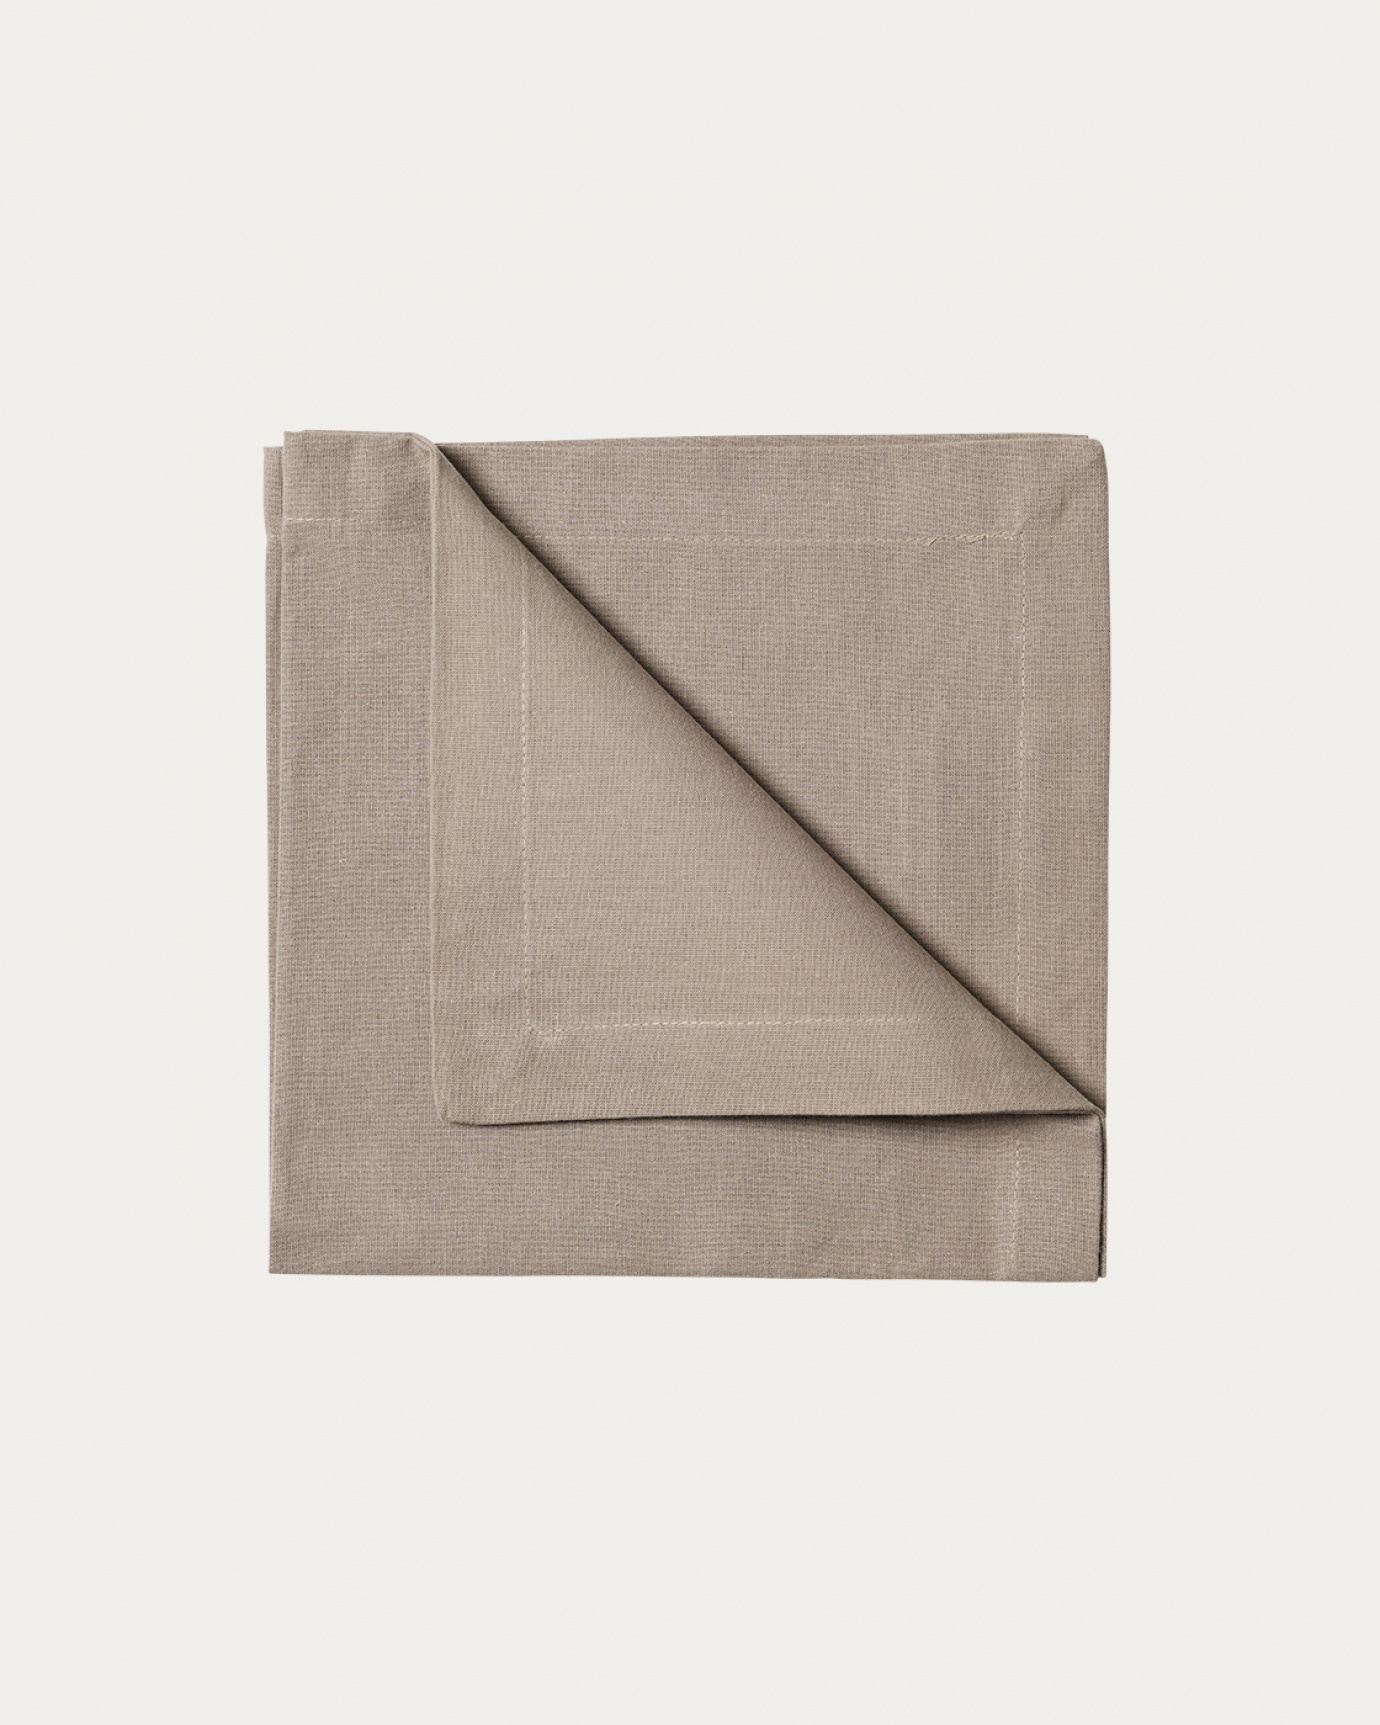 Product image mole brown ROBERT napkin made of soft cotton from LINUM DESIGN. Size 45x45 cm and sold in 4-pack.